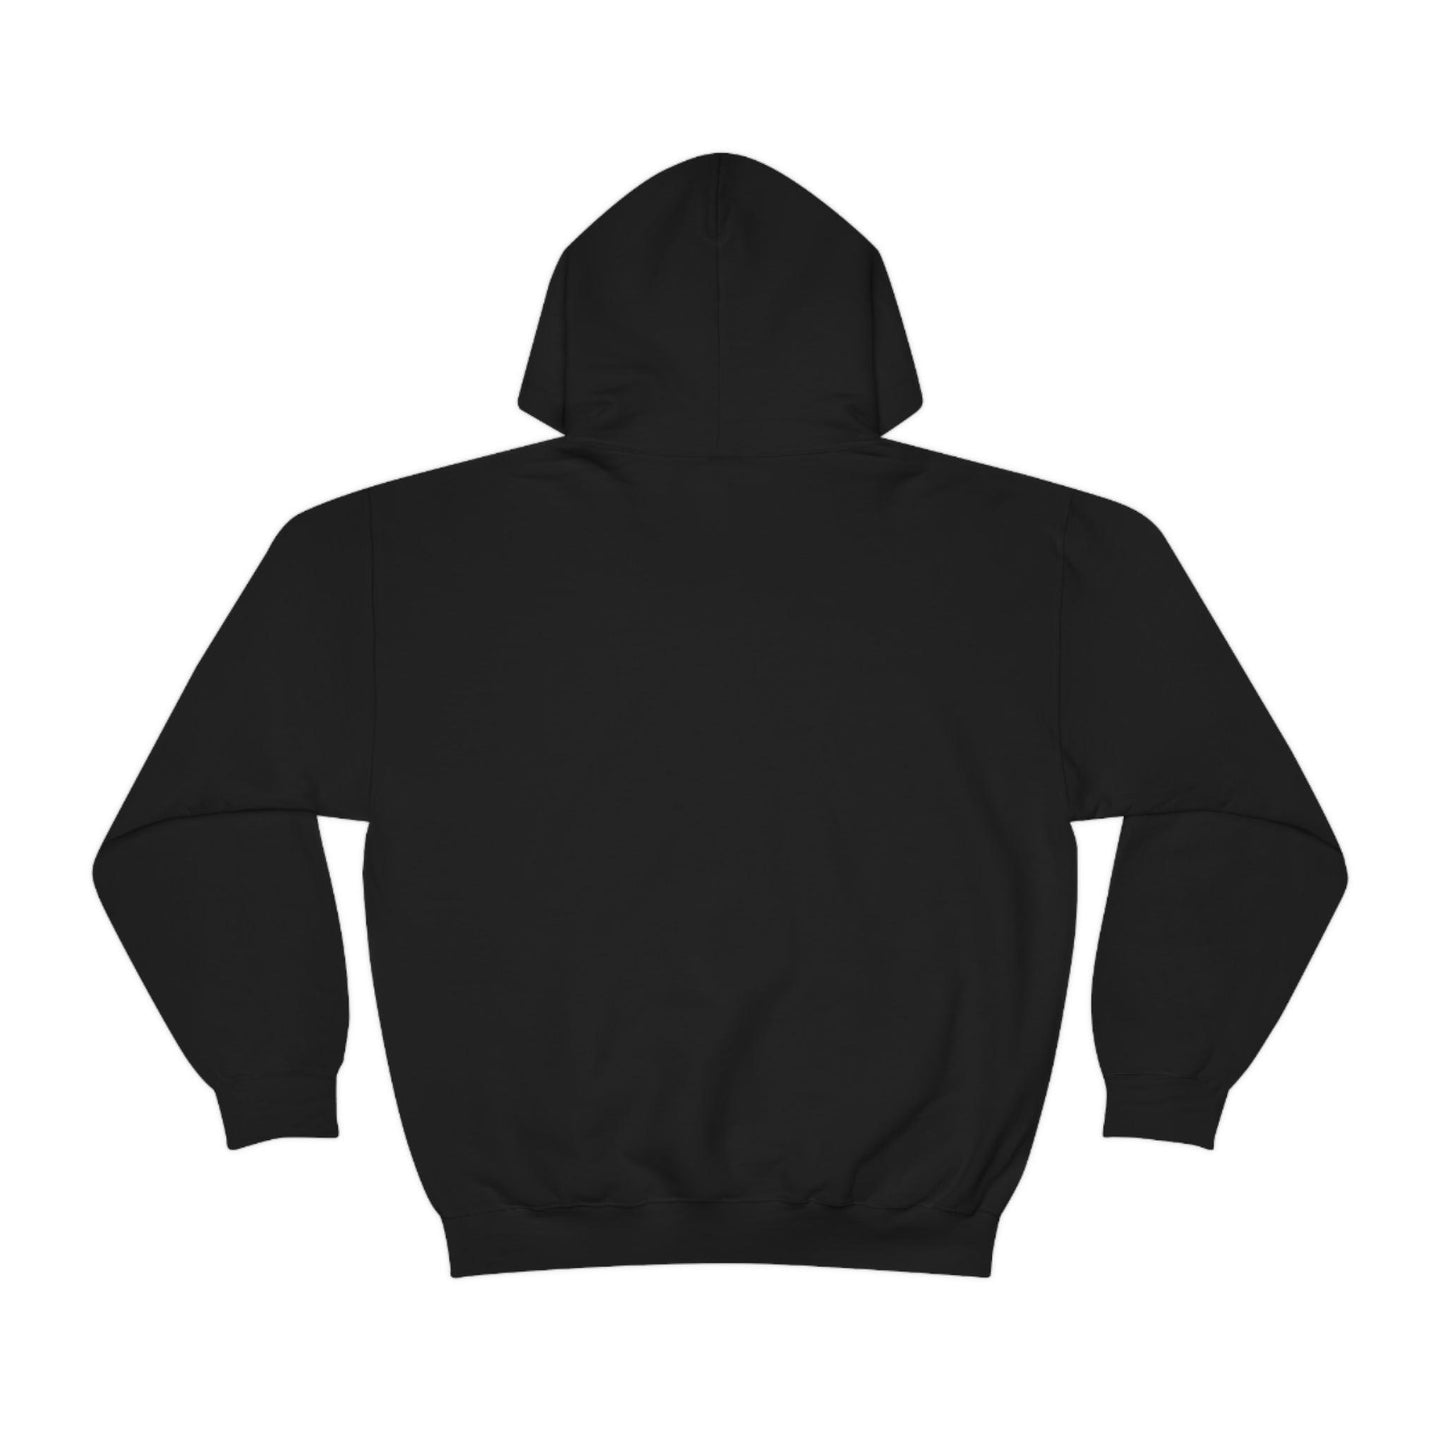 The Mountains are calling Hooded Sweatshirt - Giftsmojo